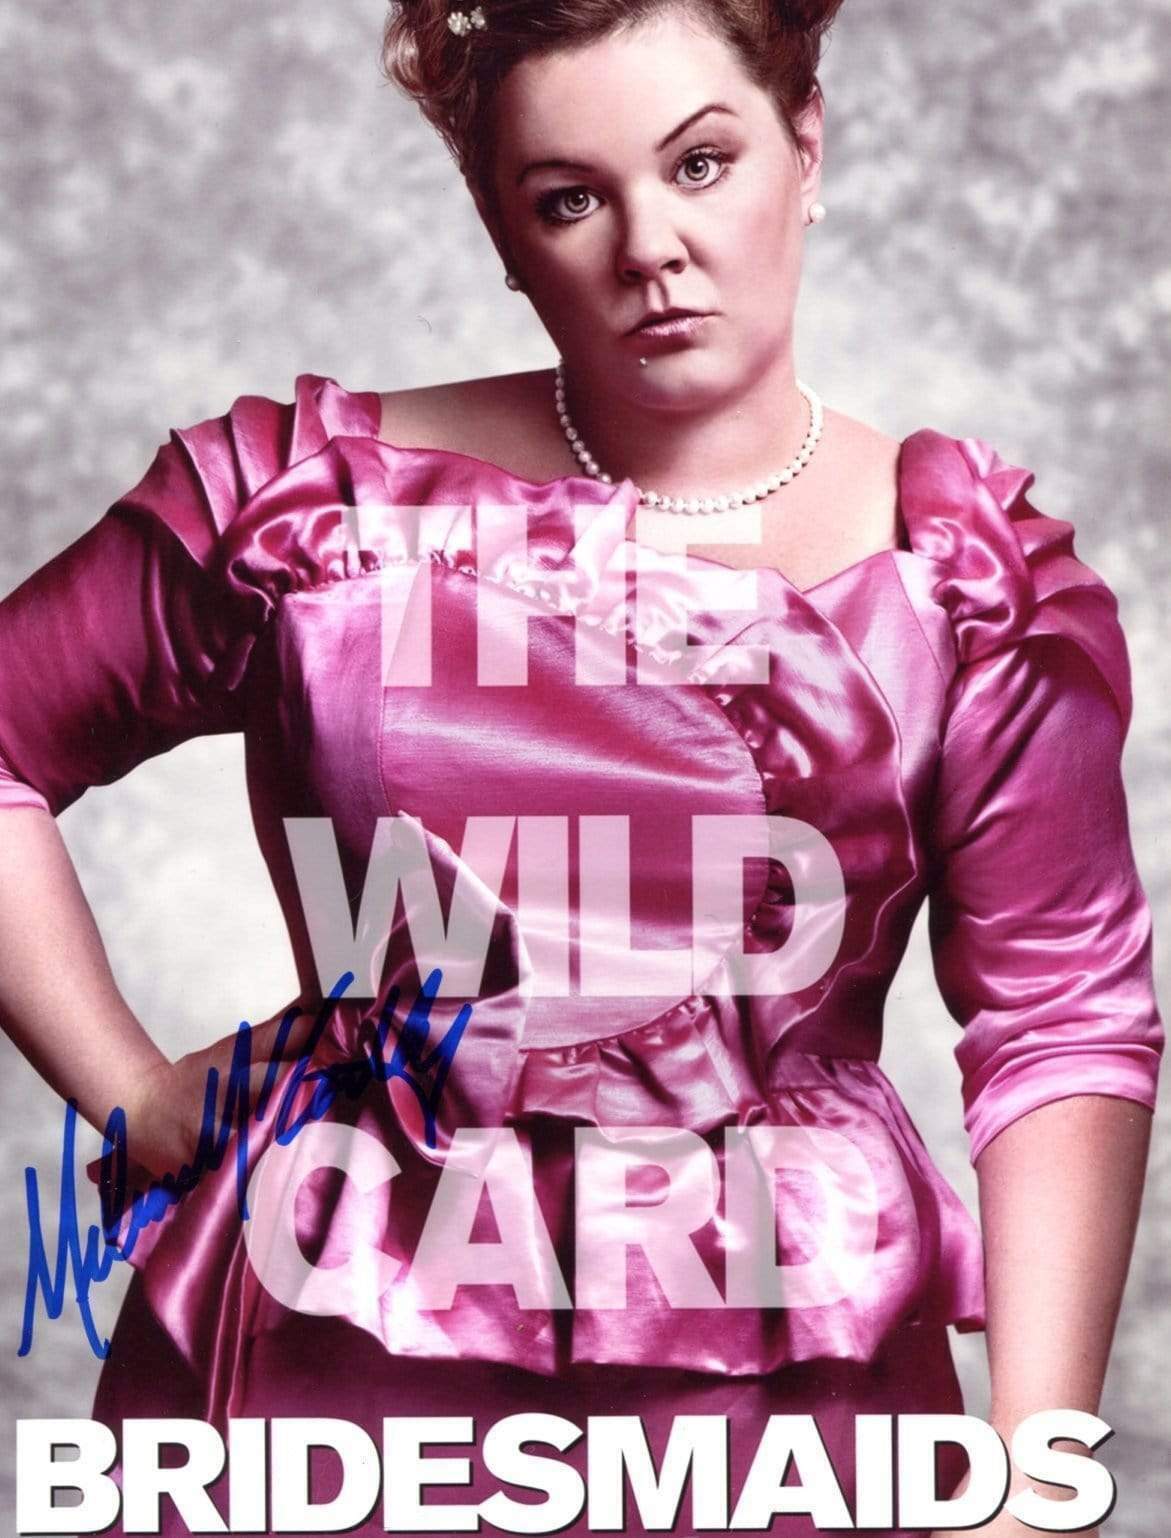 ACTRESS FASHION DESIGNER Melissa McCarthy autograph, In-Person signed Photo Poster painting